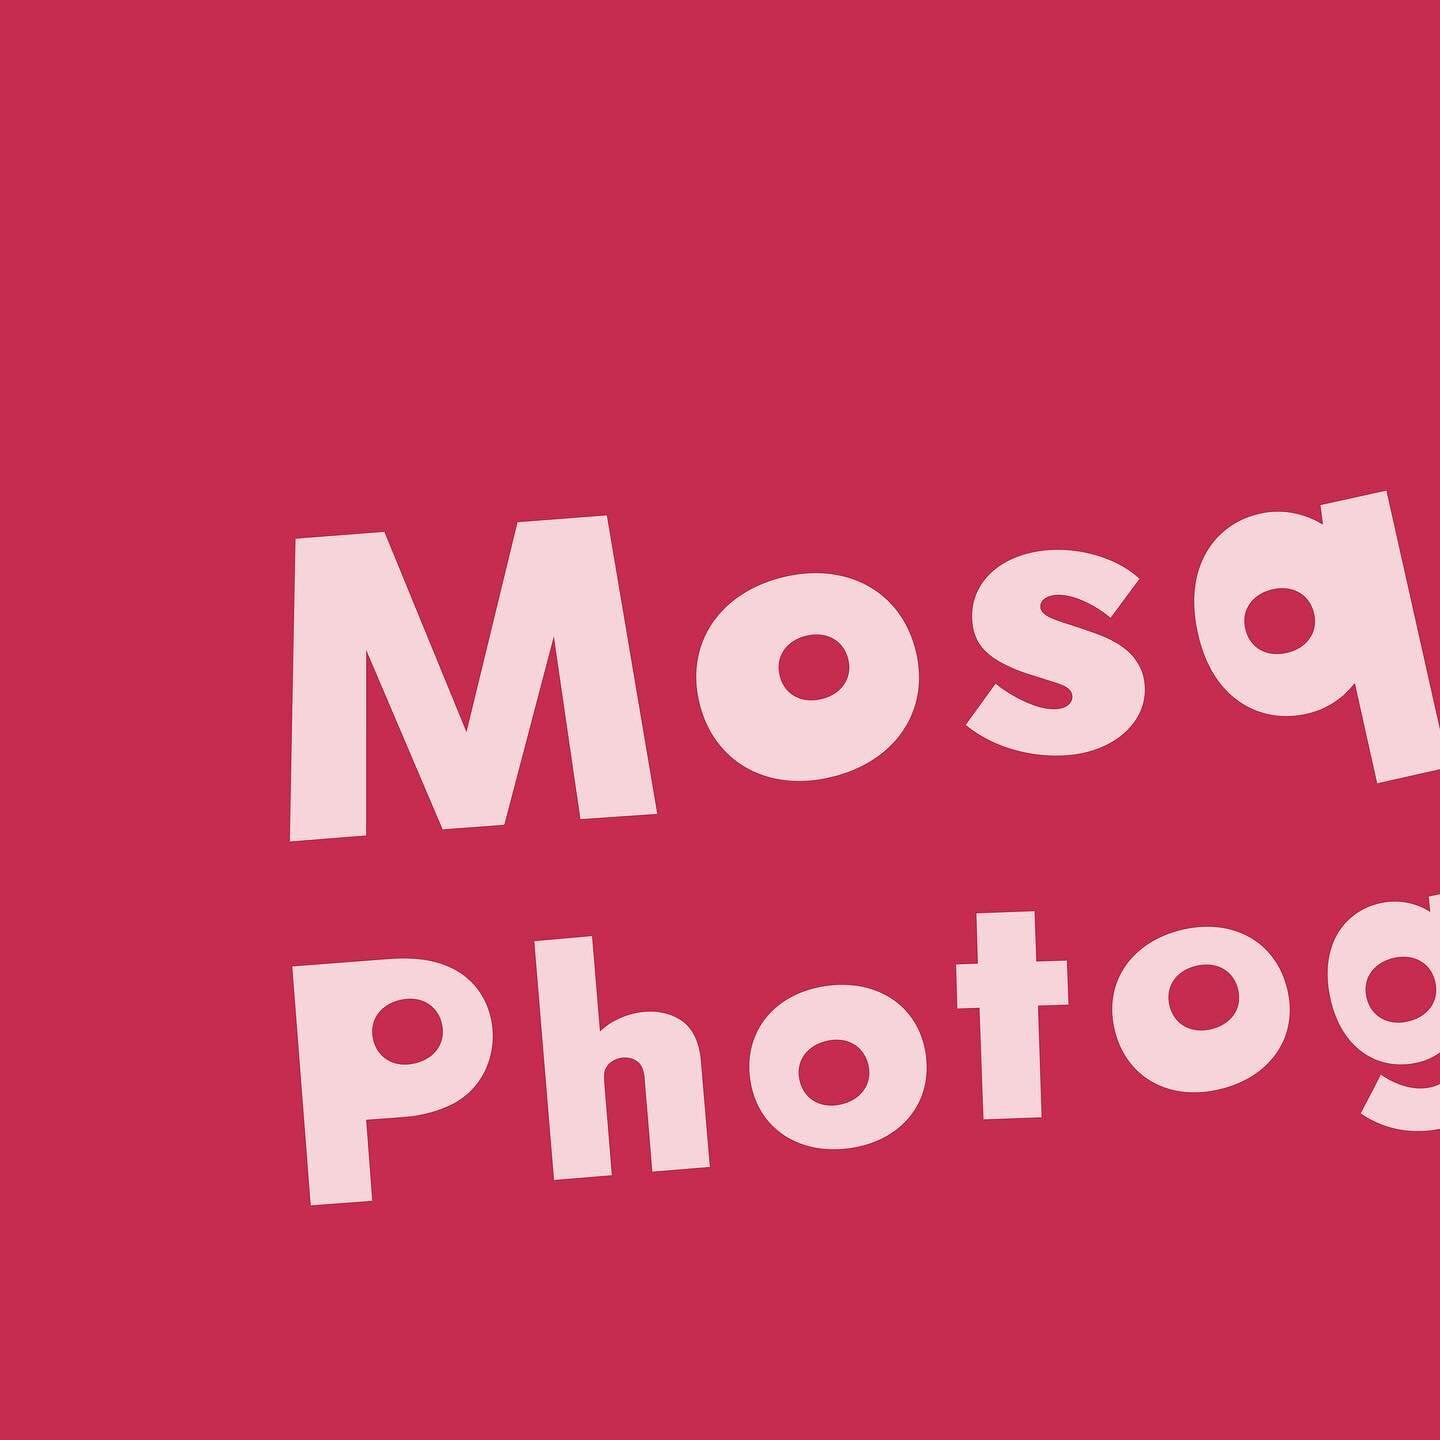 ending this full year of business with a logo for @mosquerophotography &hellip;we are so thankful for this insane year of growth for EEK! stay tuned for more!